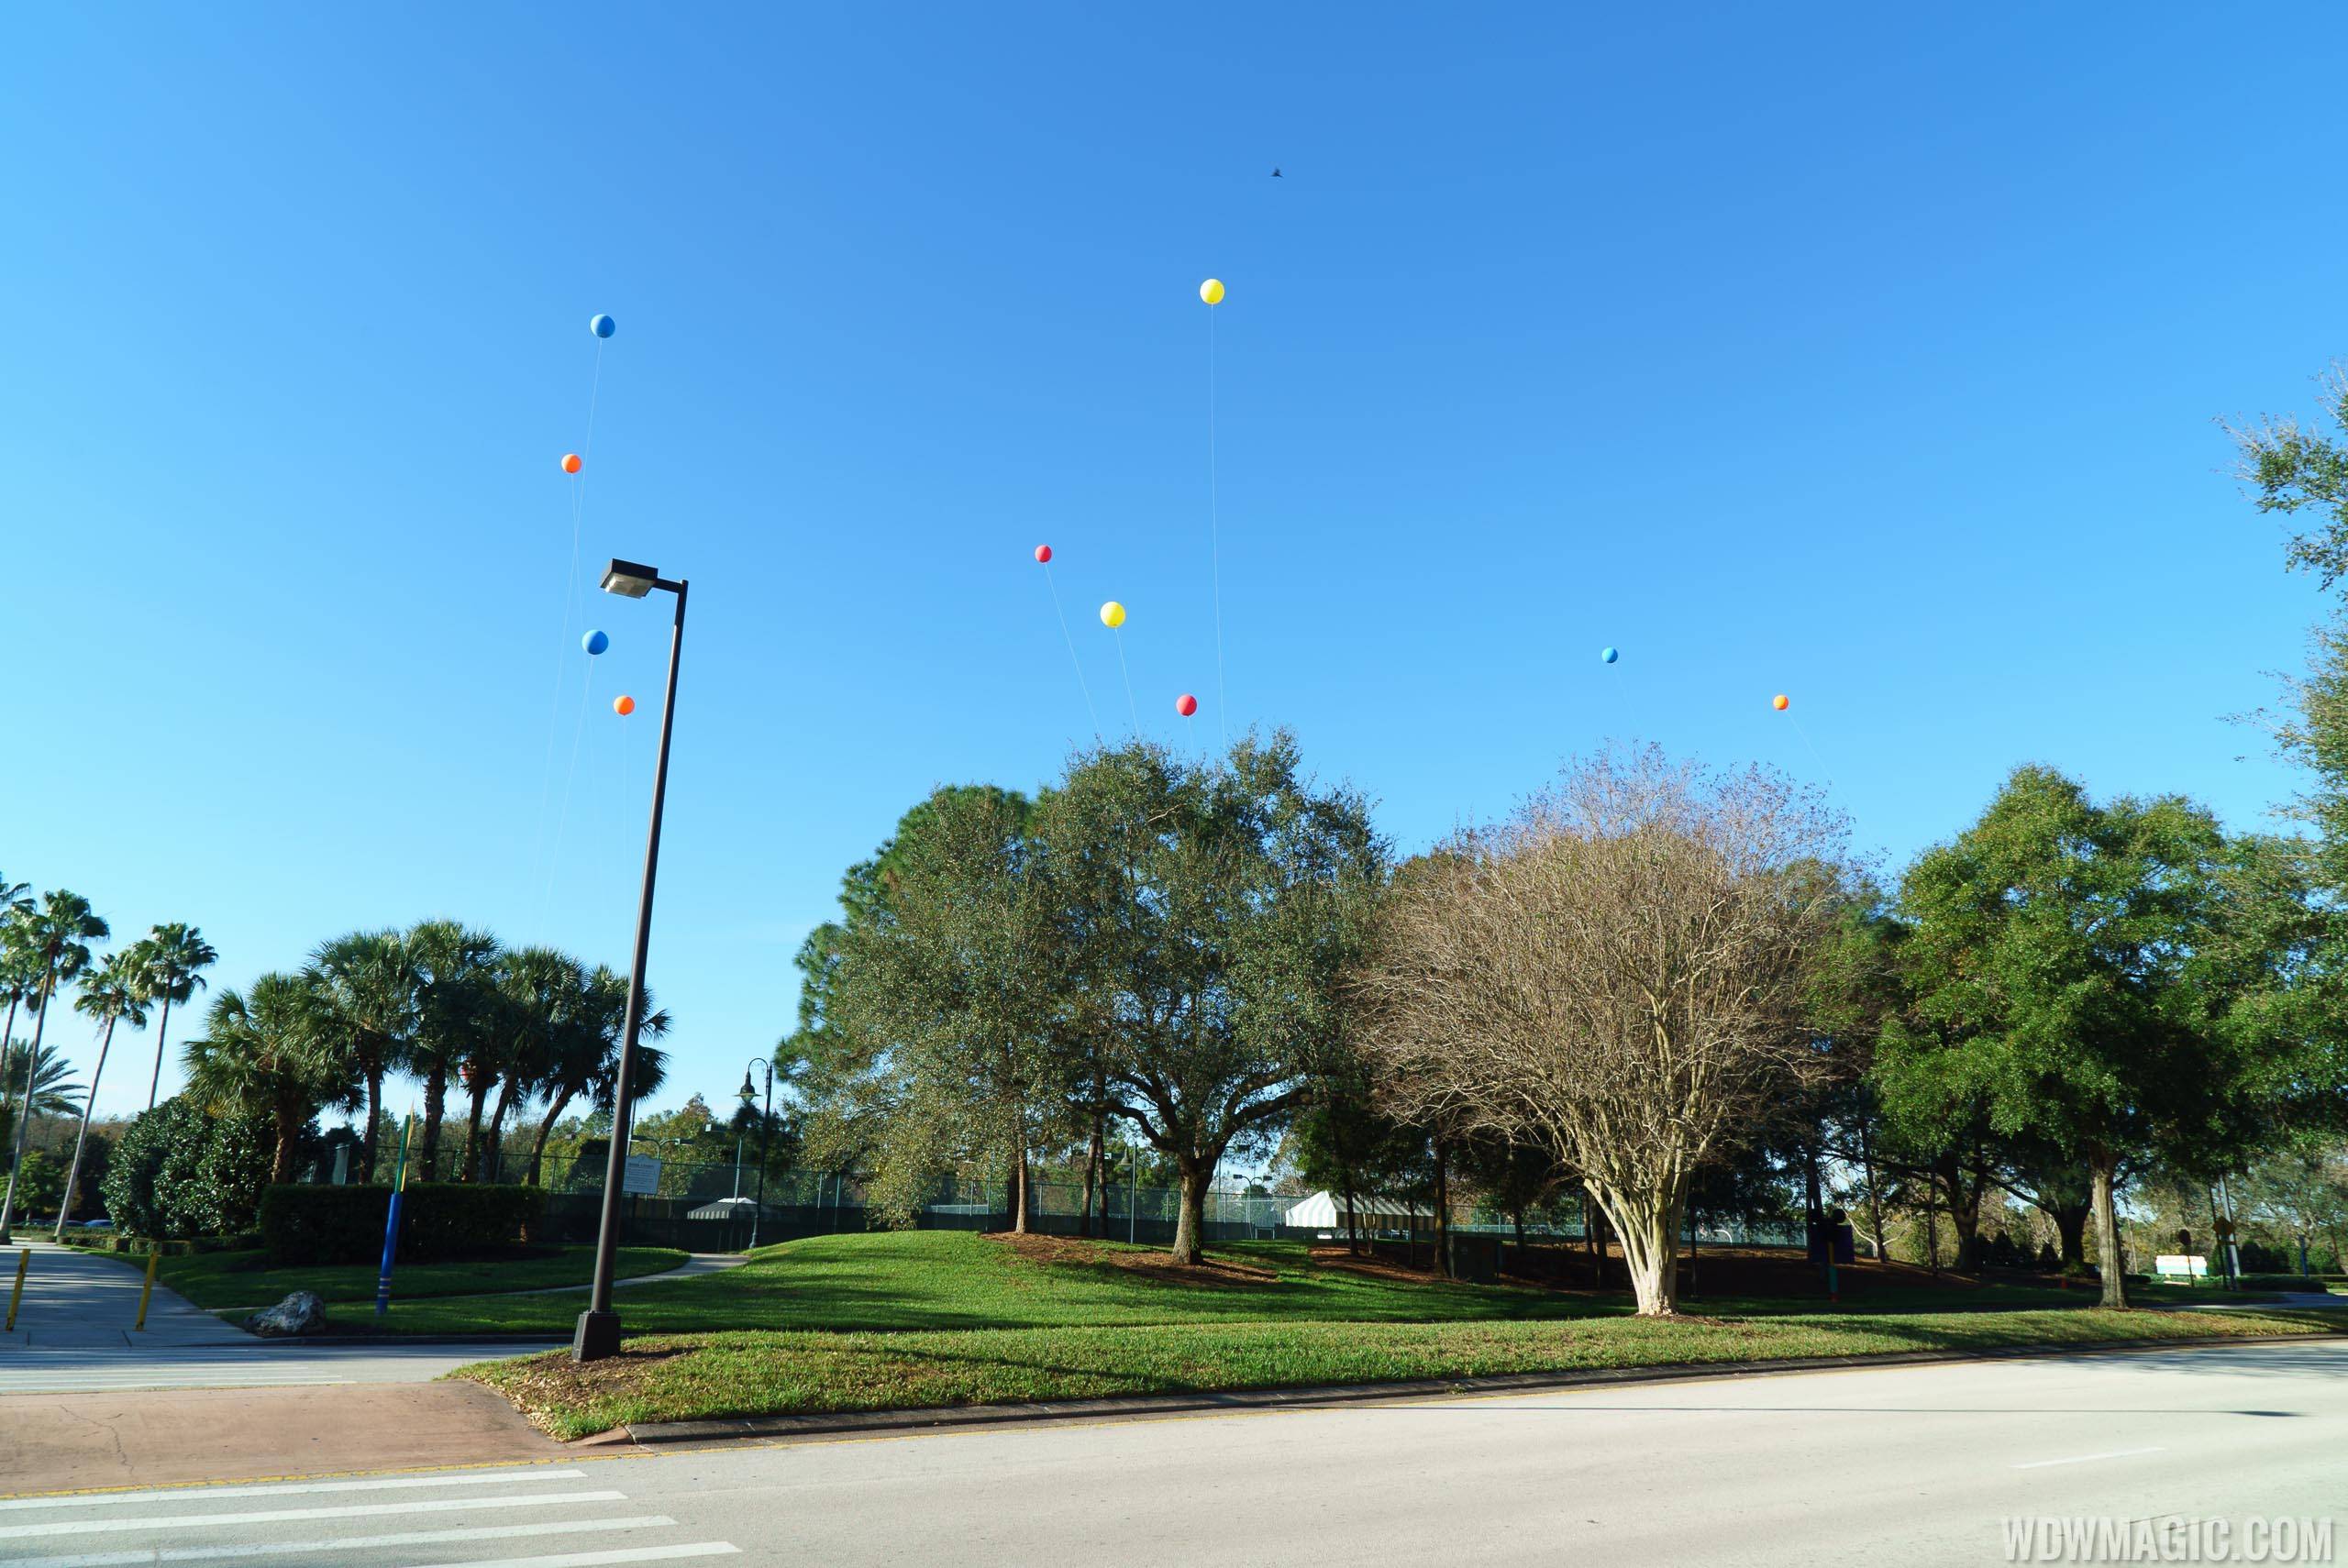 Balloons over then tennis courts